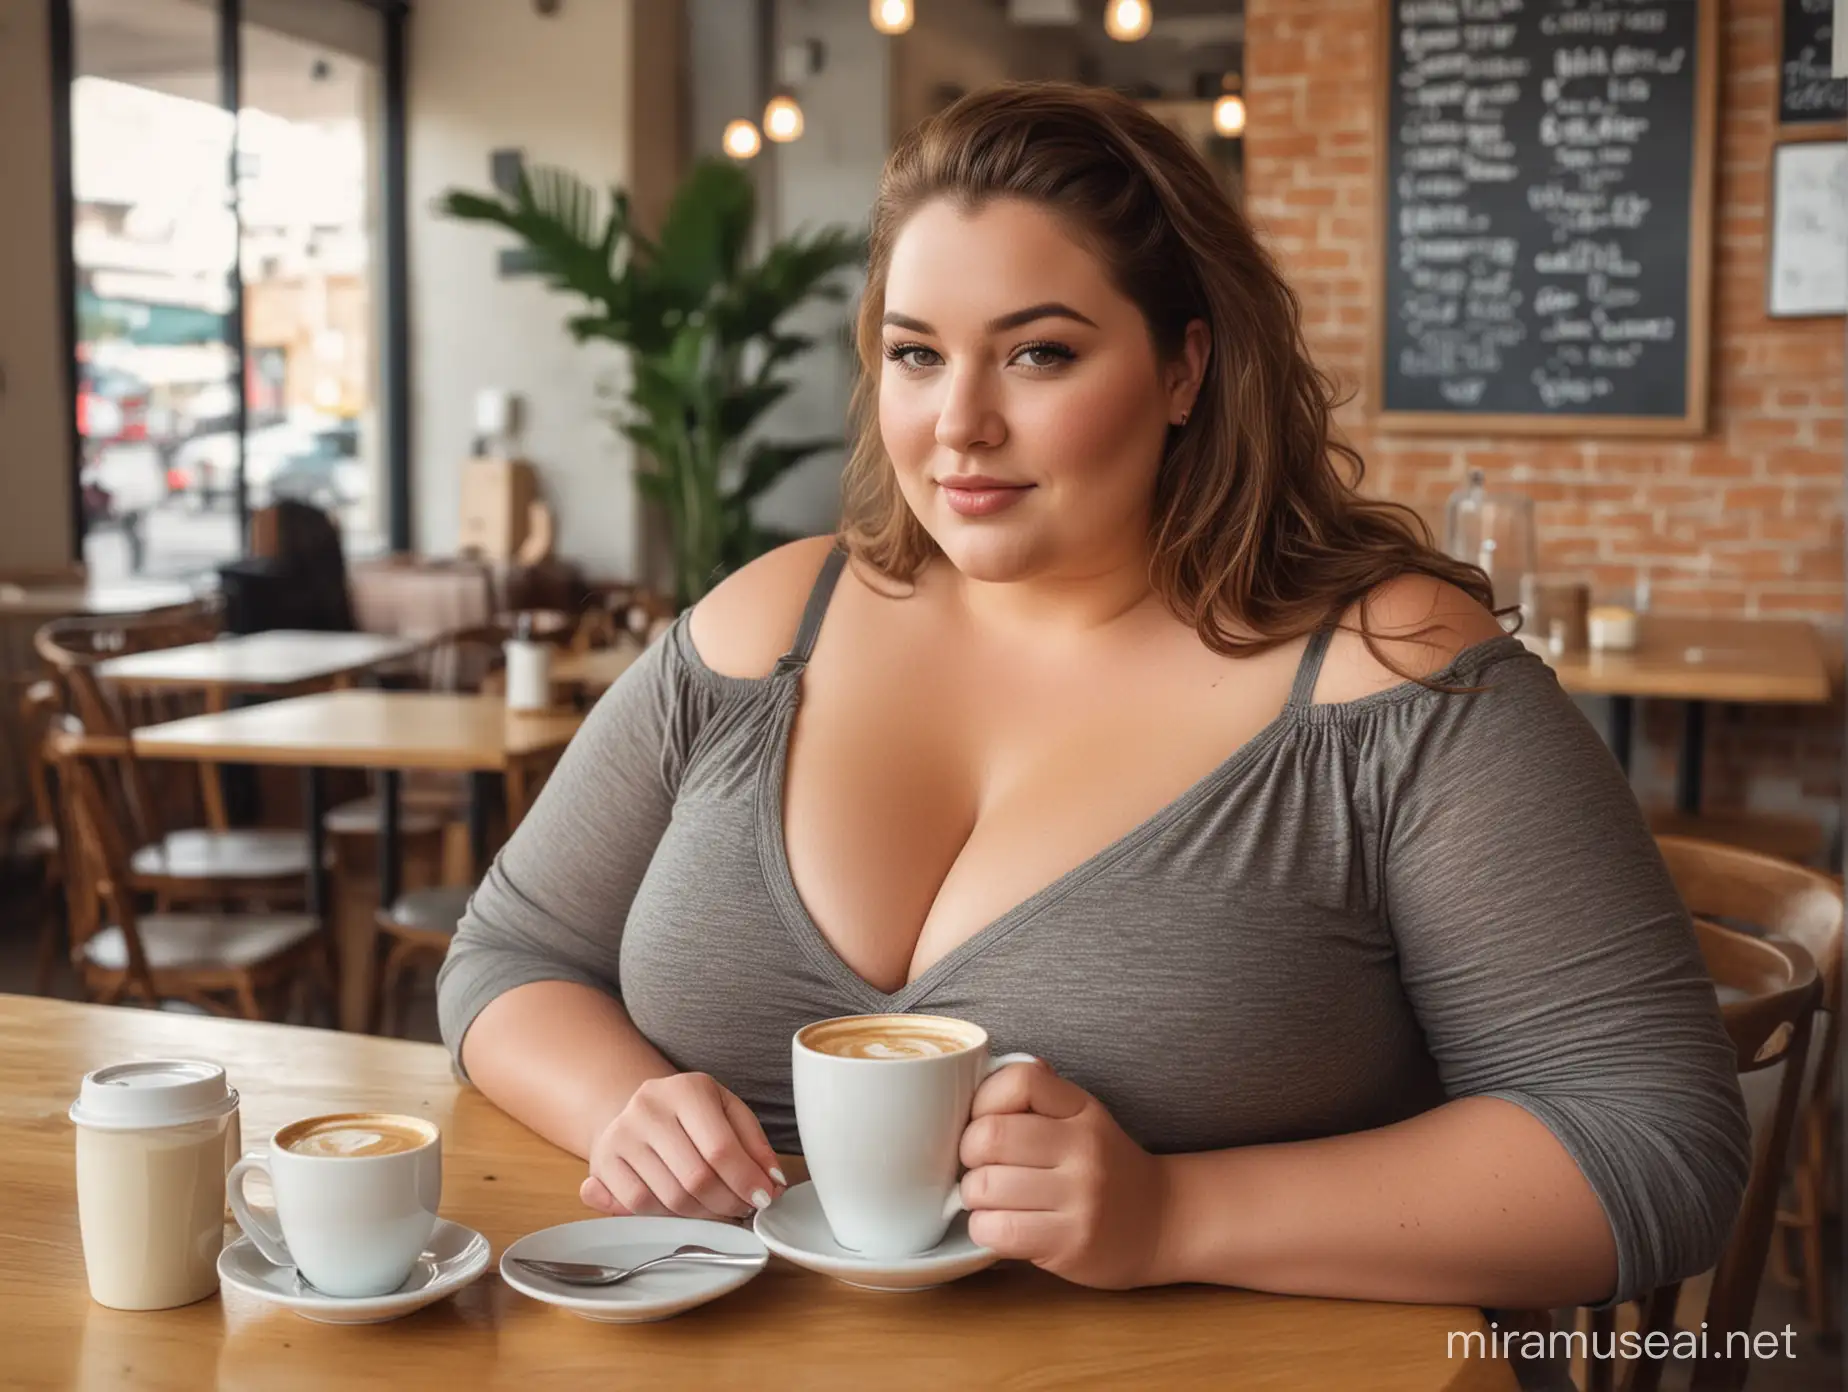 beautiful plus size woman, at a coffee shop, curvy.